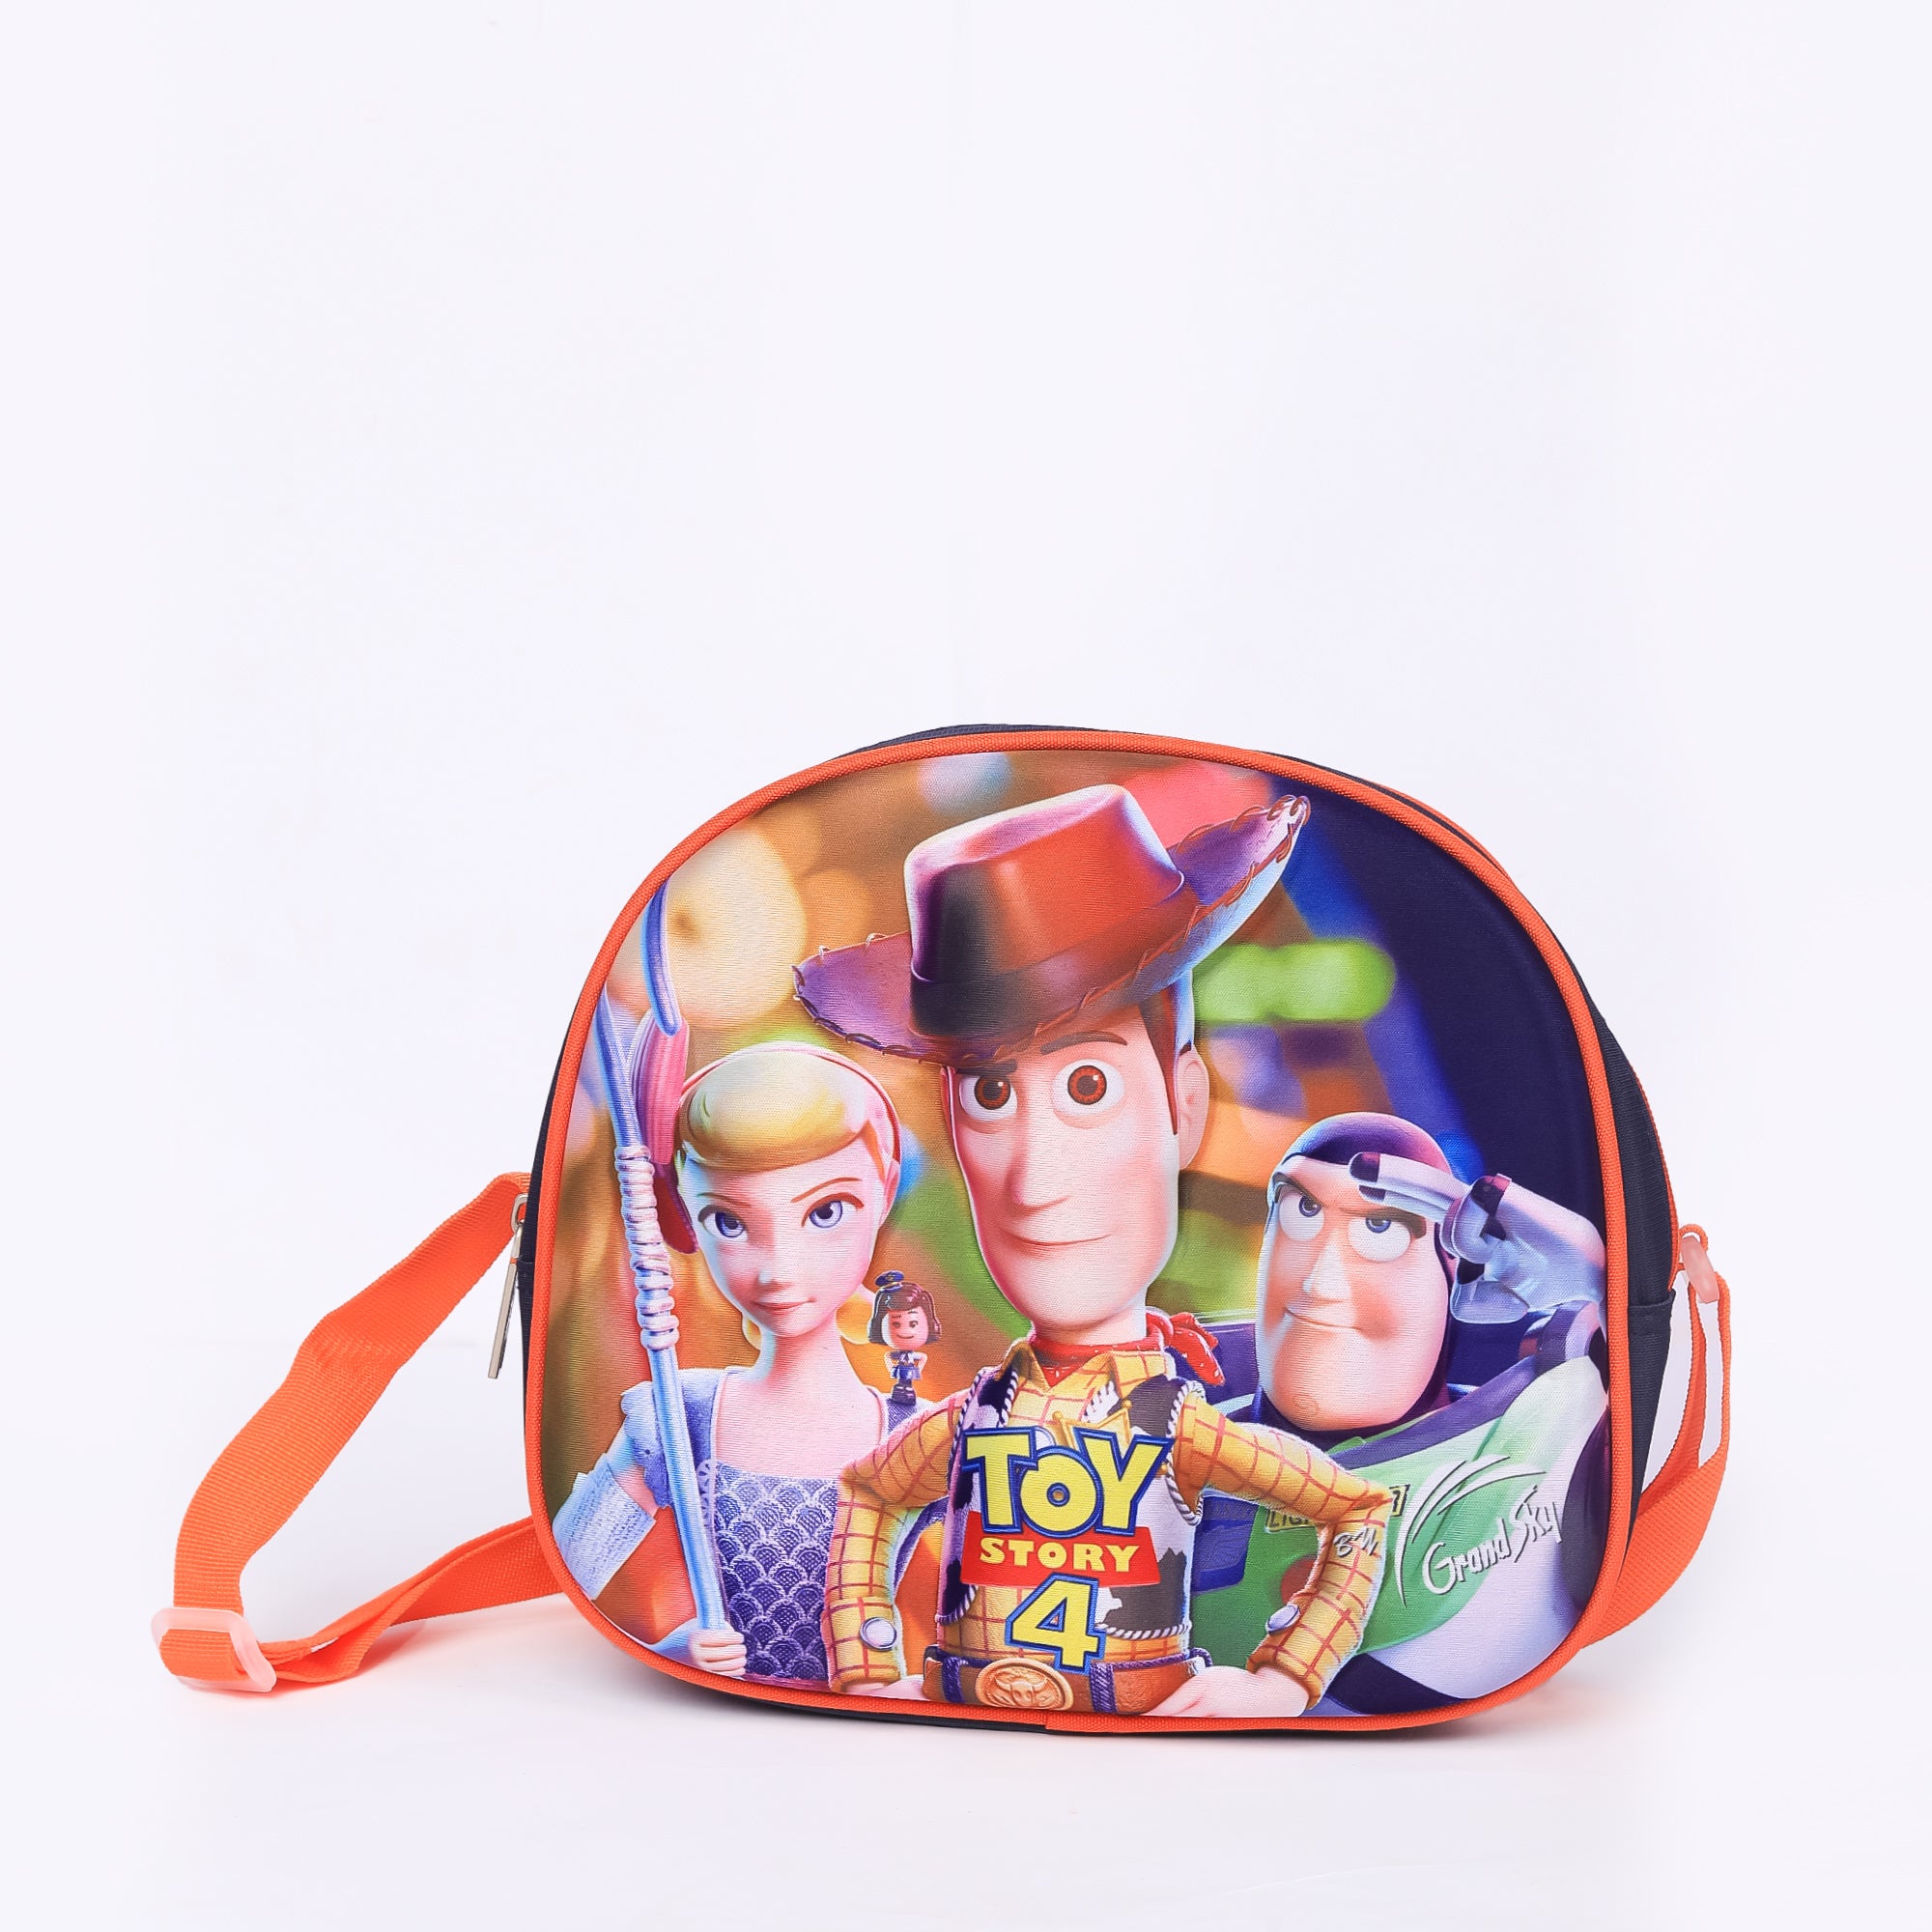 Toy Story 2 Trolly Bag For Kids 16 INCH